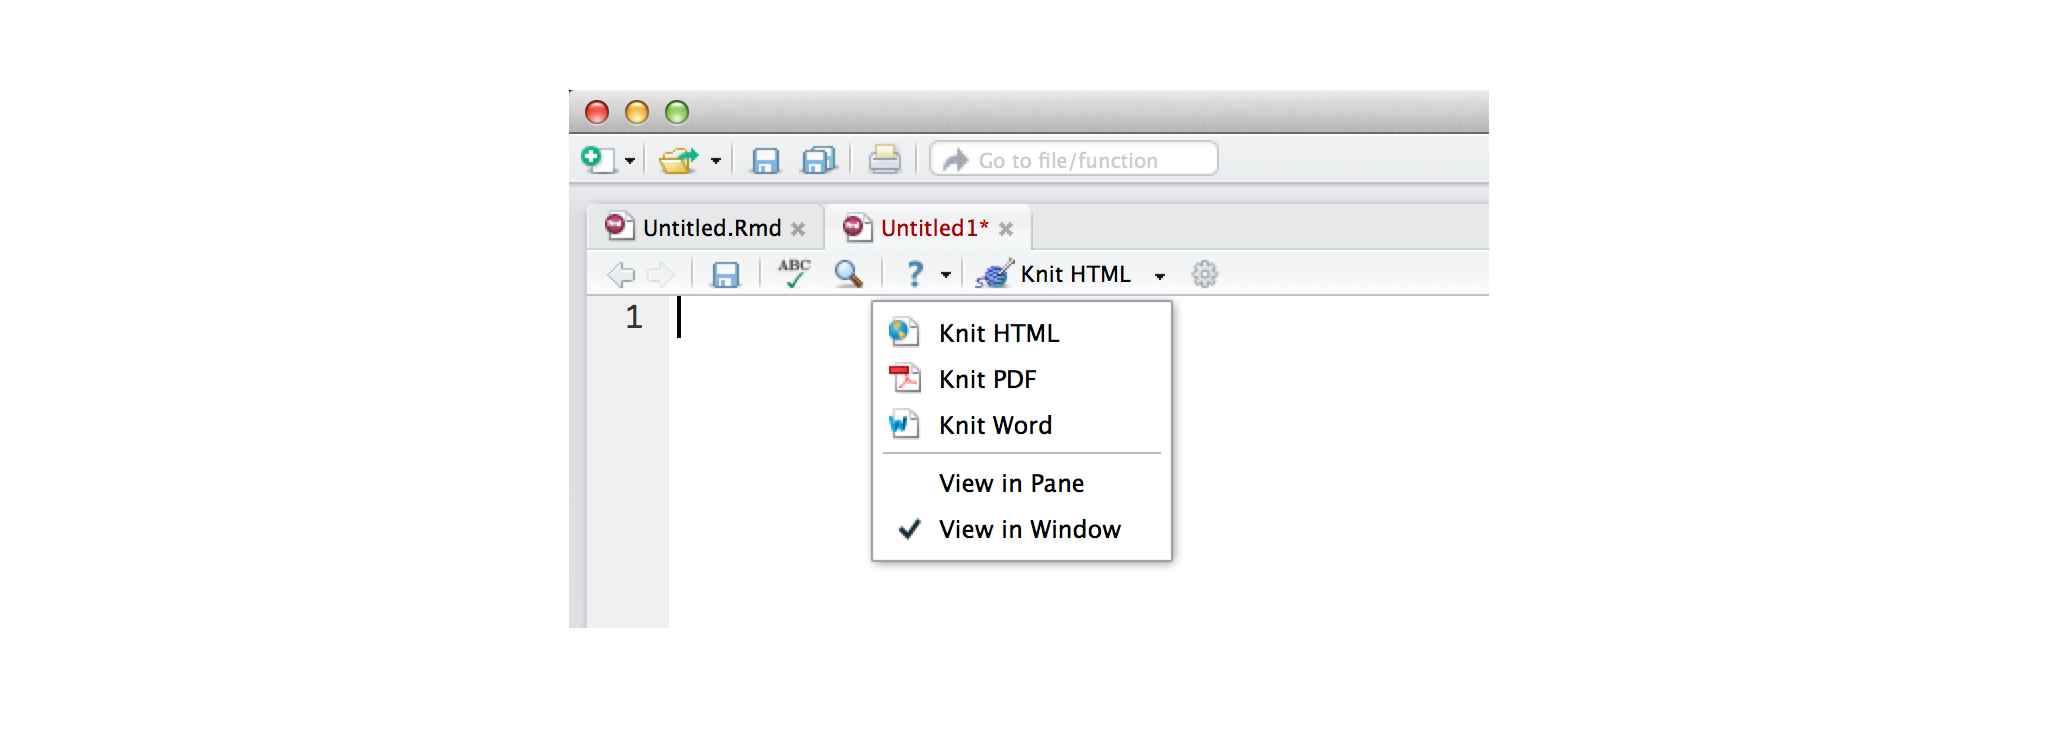 Knit HTML drop down with options Knit HTML, Knit PDF, Knit Word and View in Pane, View in Window